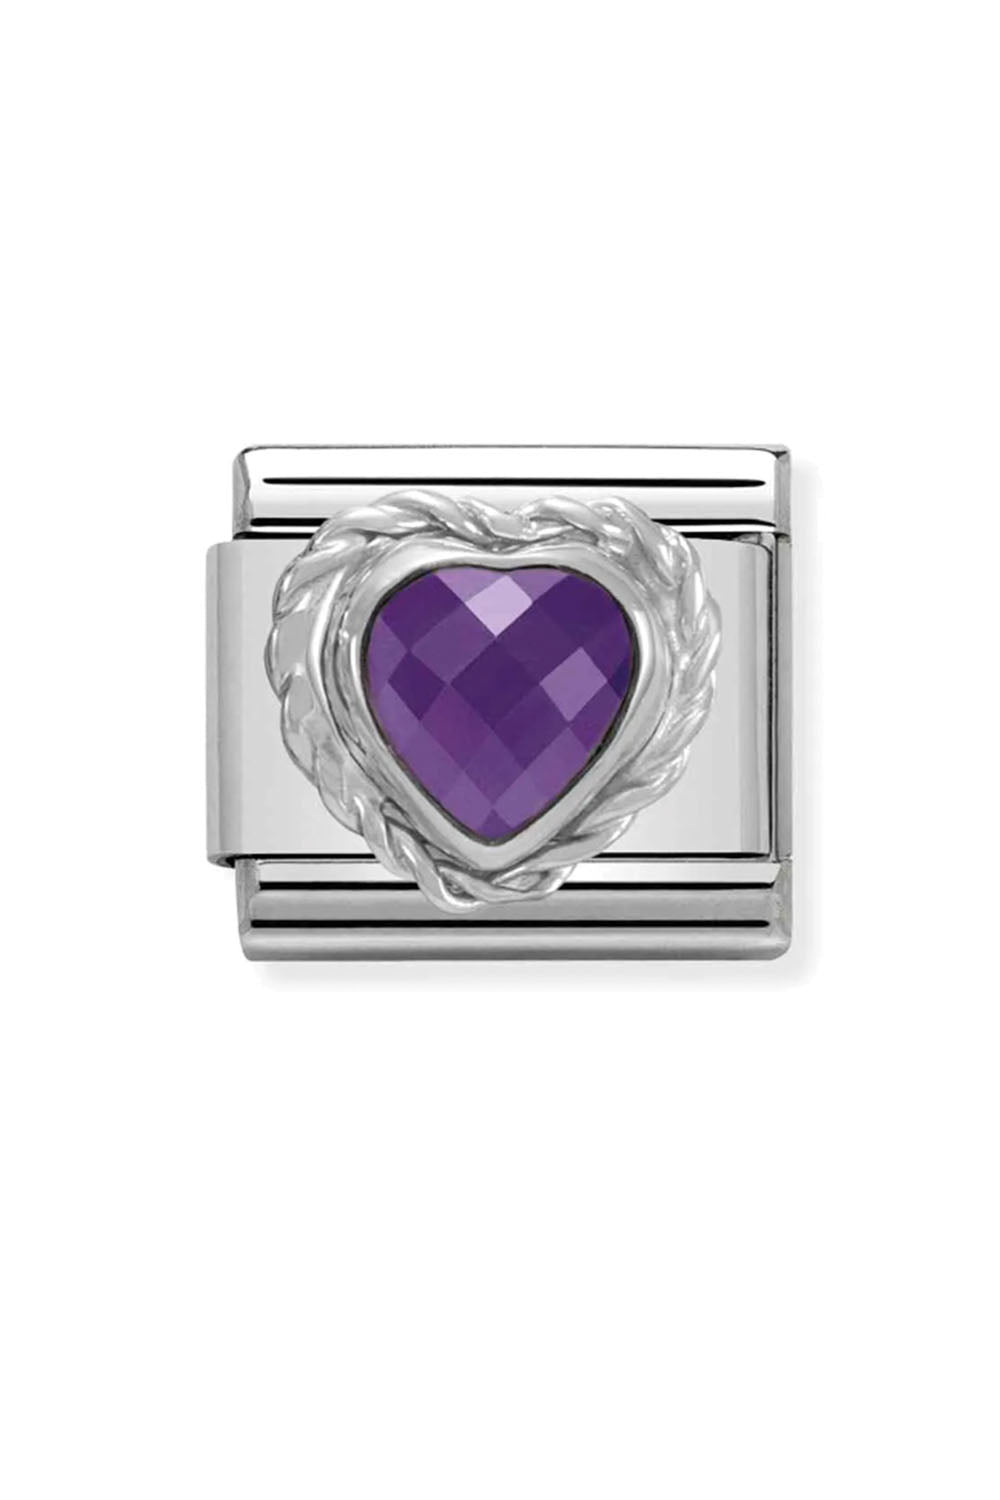 Heart faceted with 925 Sterling silver twisted setting and CZ Purple